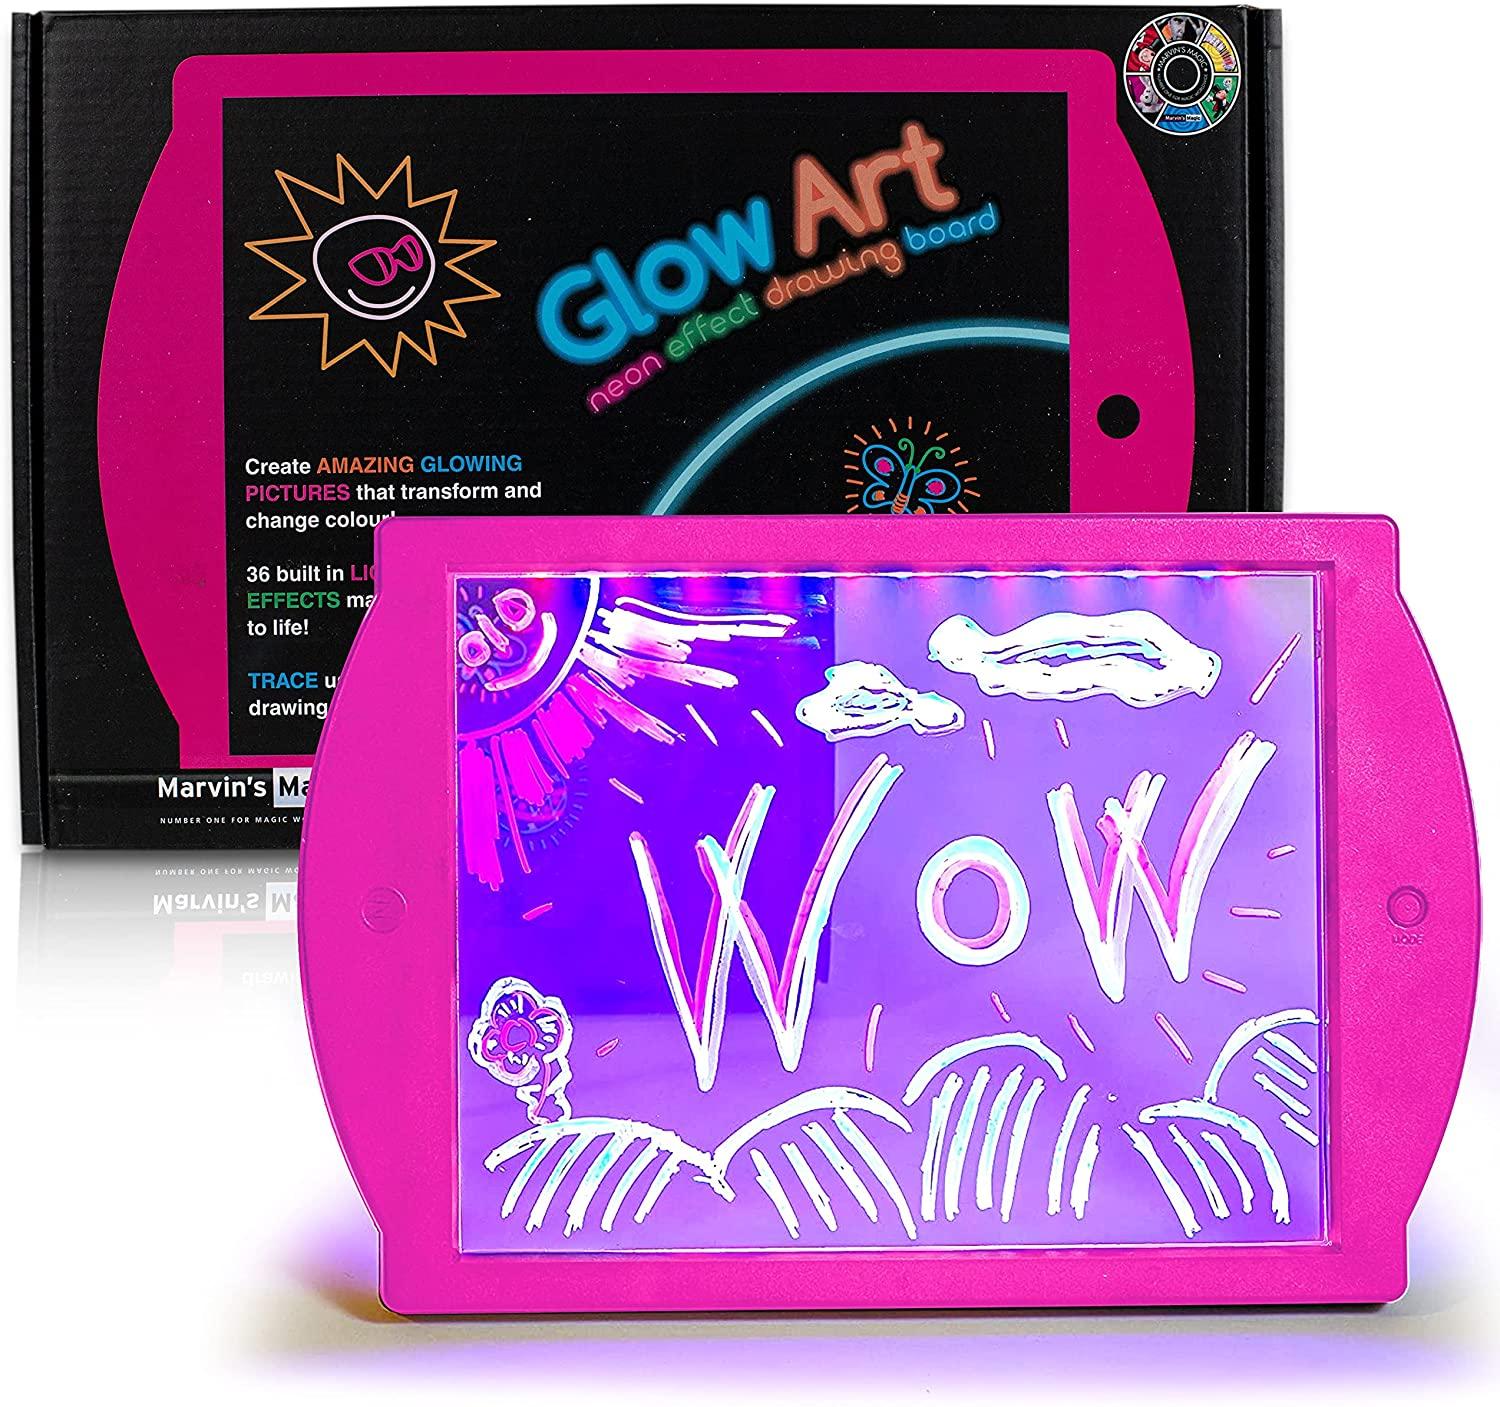 Crayola Ultimate Light Board Drawing Tablet Light-Up Toy For Kids